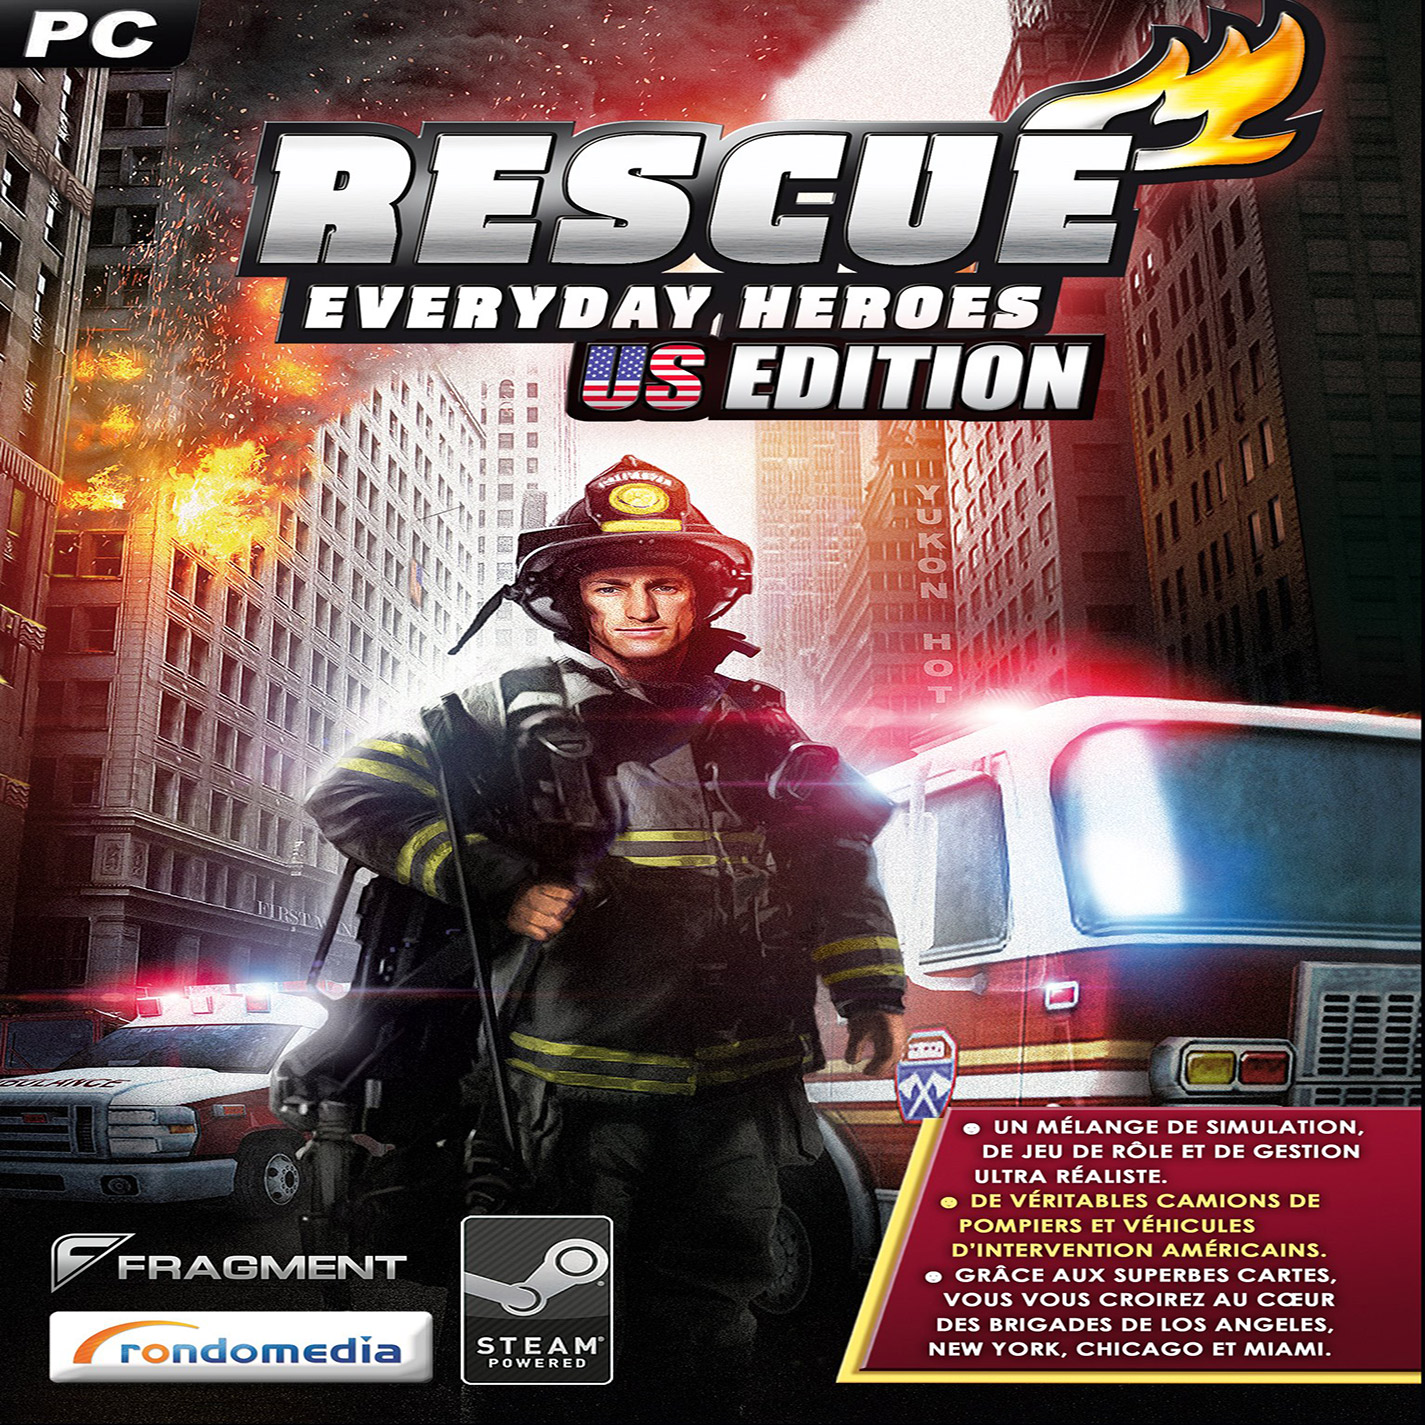 Rescue: Everyday Heroes - US Edition - predn CD obal